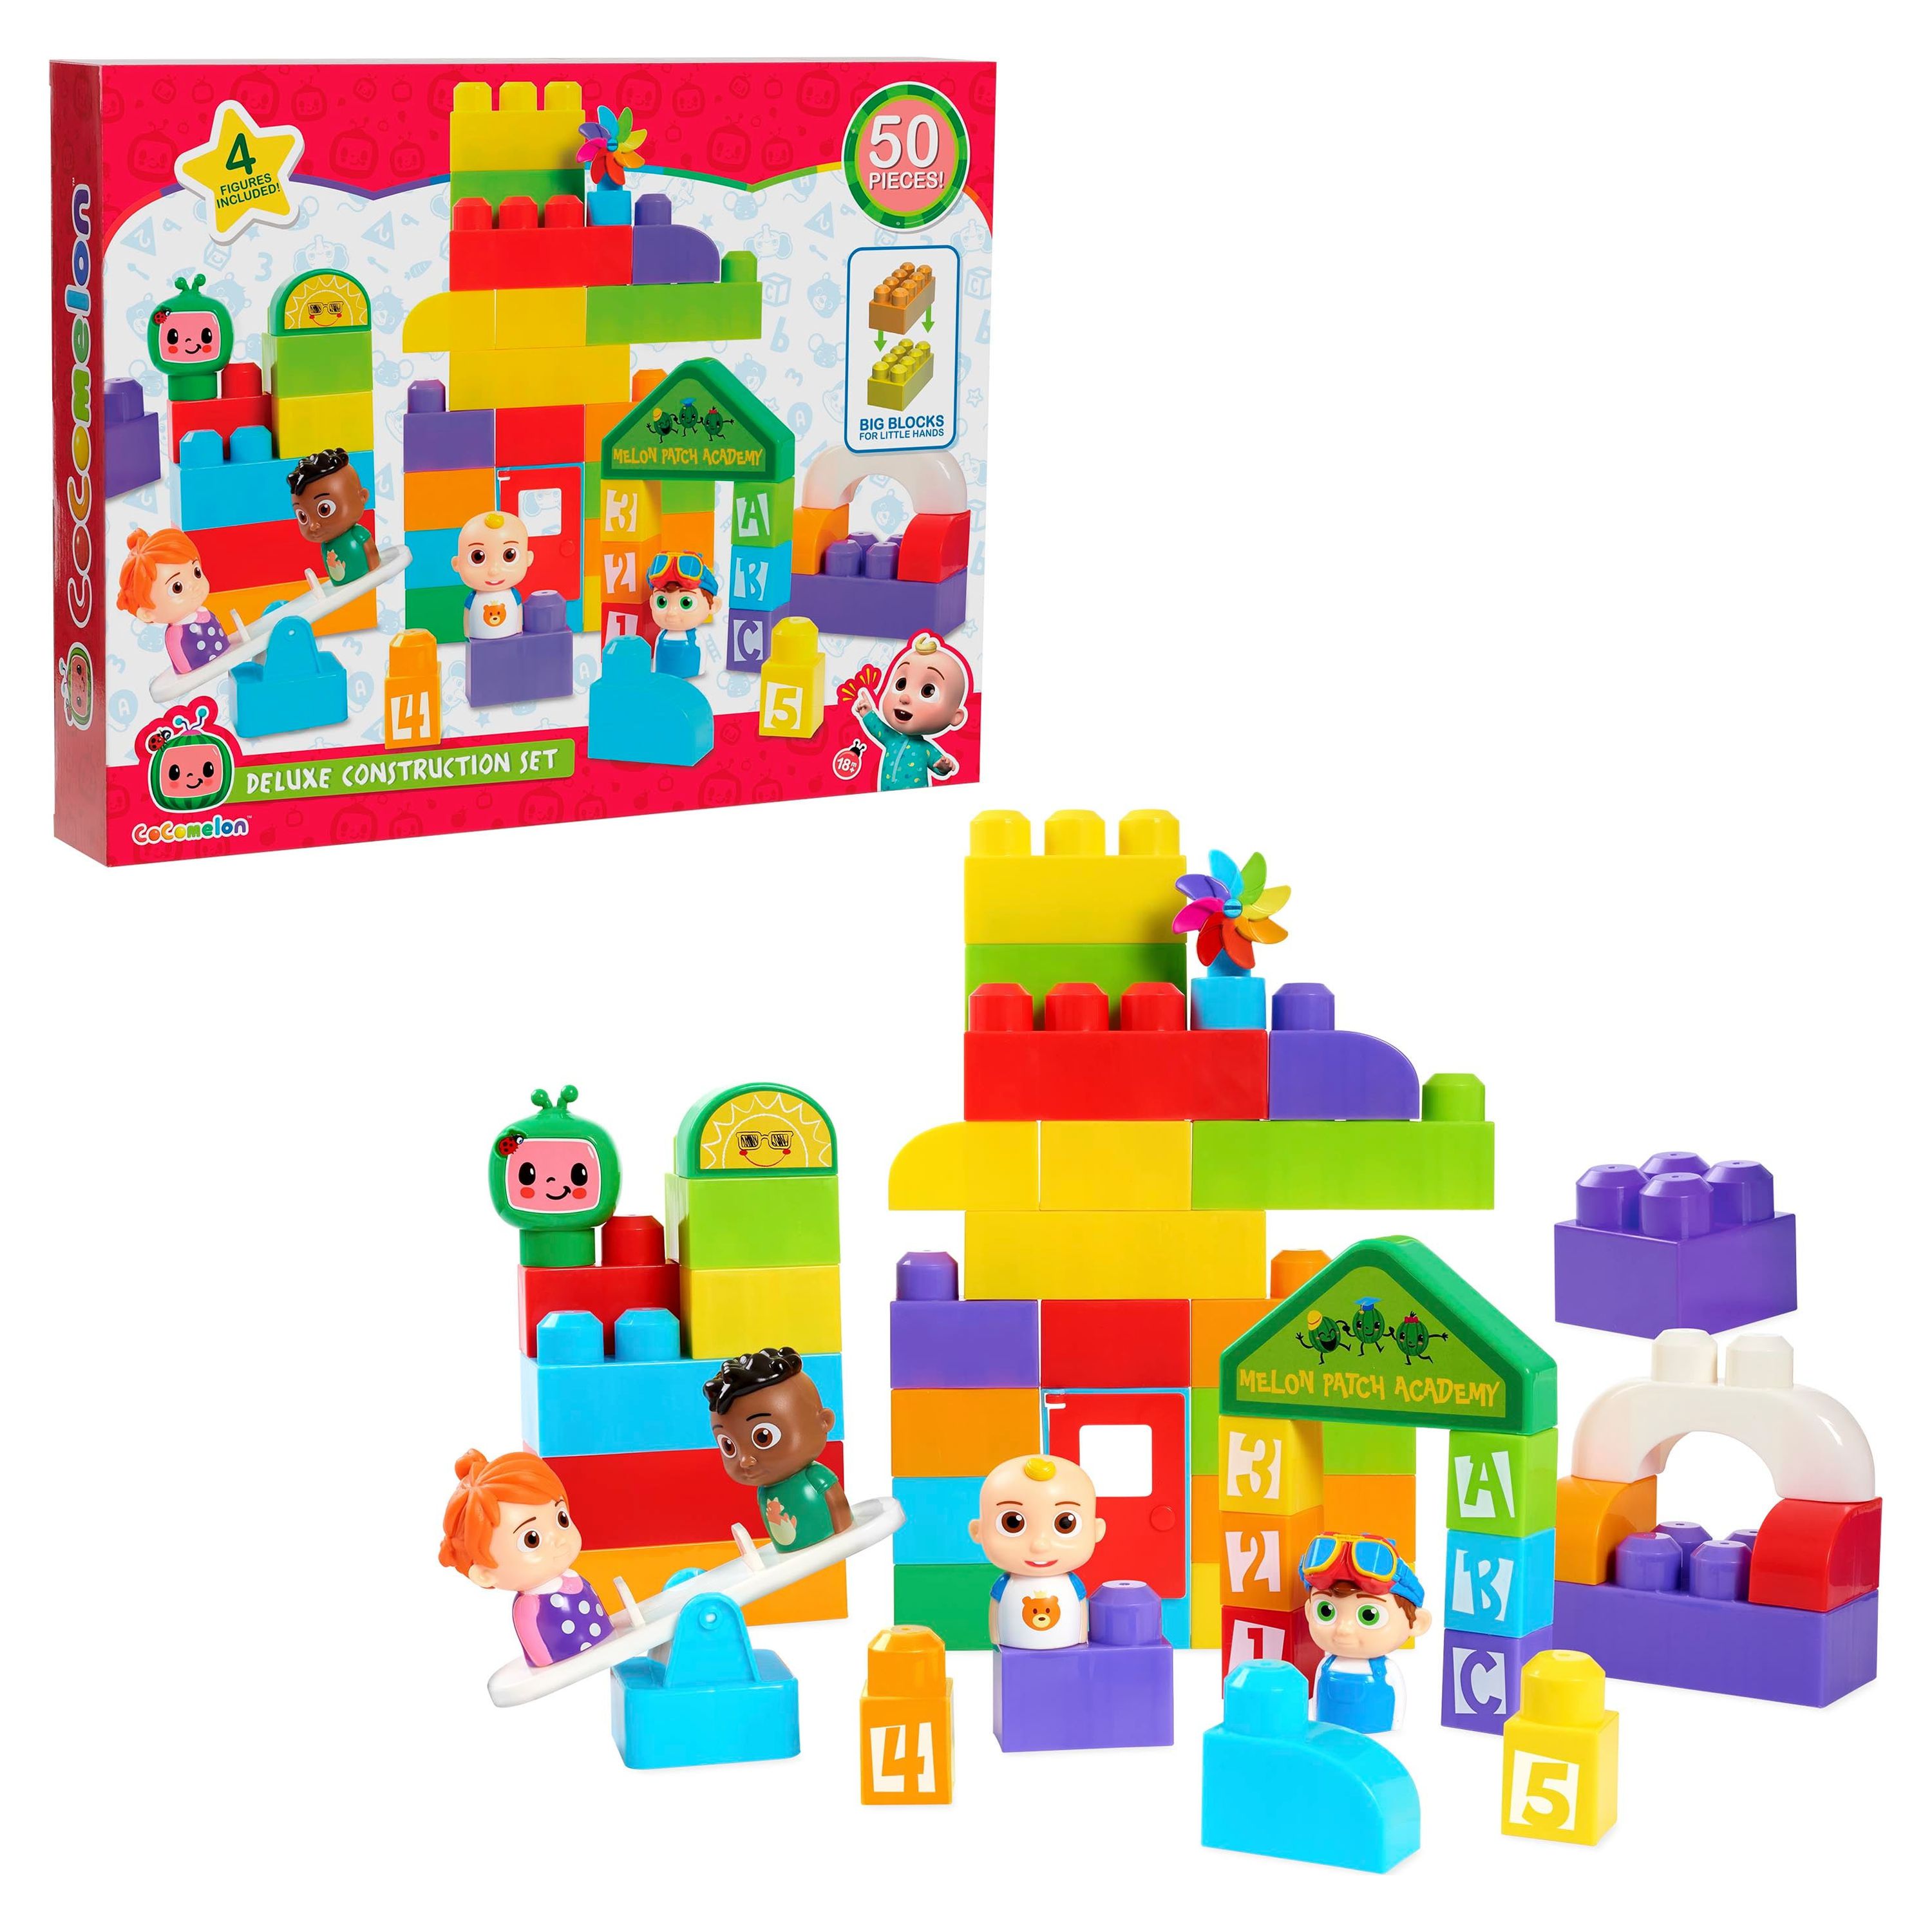 Cocomelon Deluxe Construction Set, Officially Licensed Kids Toys for Ages 18 Month, Gifts and Presents - image 1 of 6